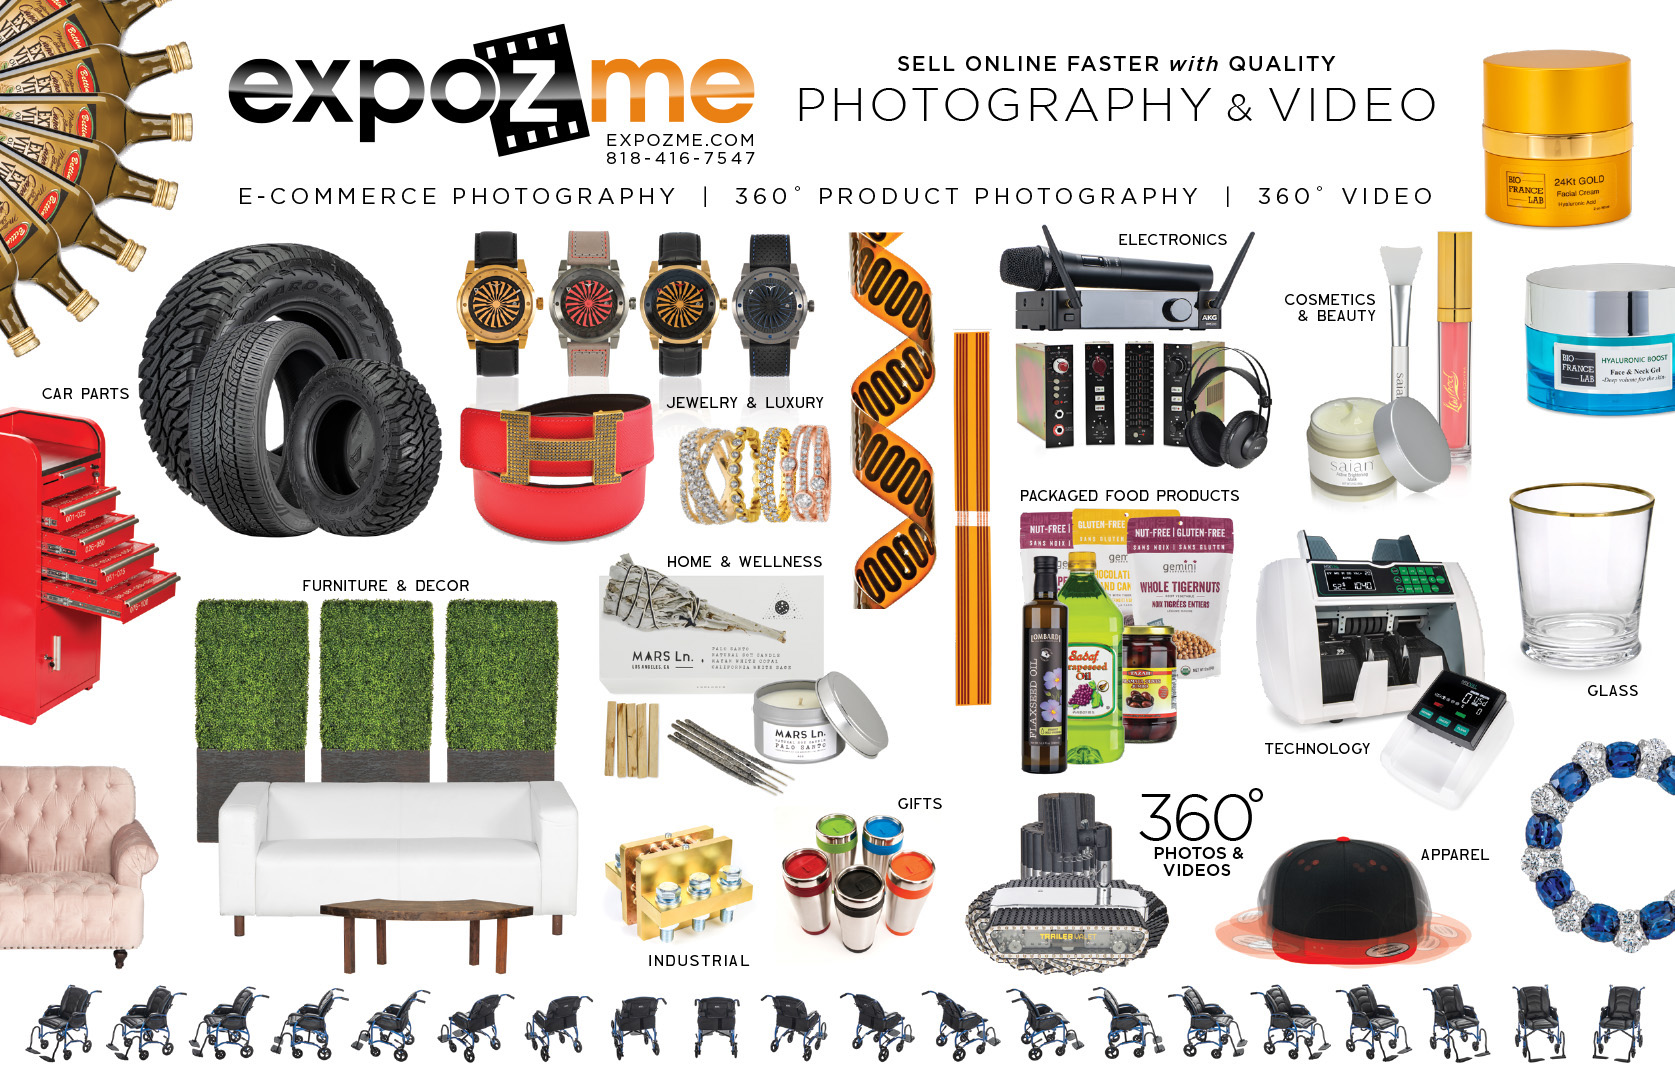 Assortment of products photographed professionally done by photographer Erick Amirkhanian at Expozme photography studio in Los Angeles CA for eCmmerce stores contact us using our b2b contact form for monthly project discounts